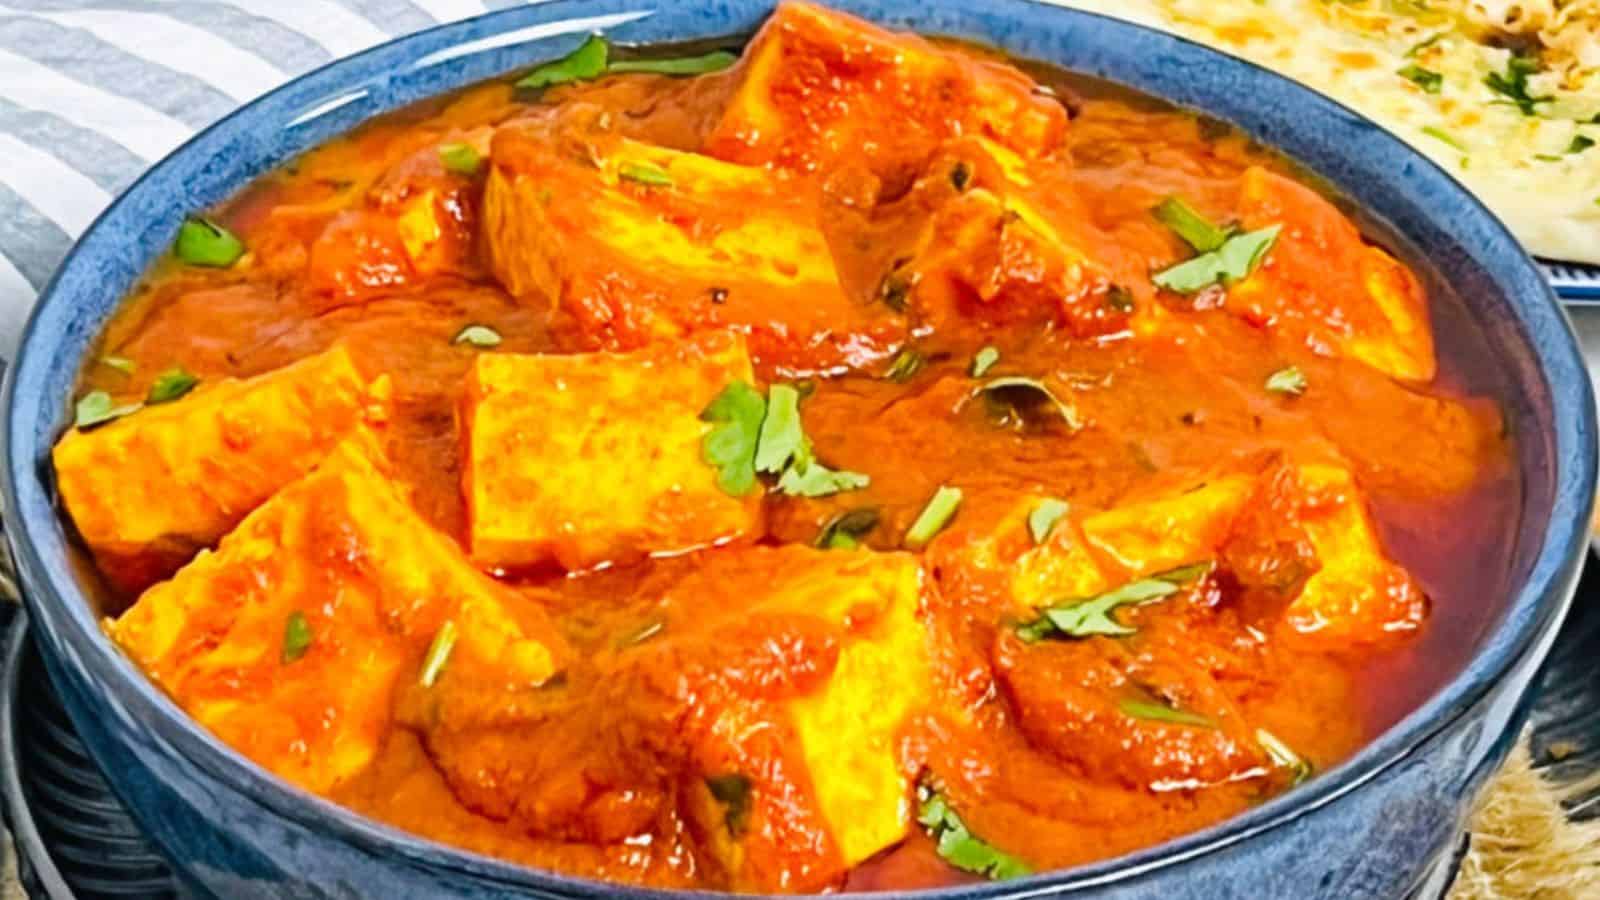 A bowl of Paneer Butter Masala with vibrant orange sauce garnished with herbs, served with naan bread in the background.